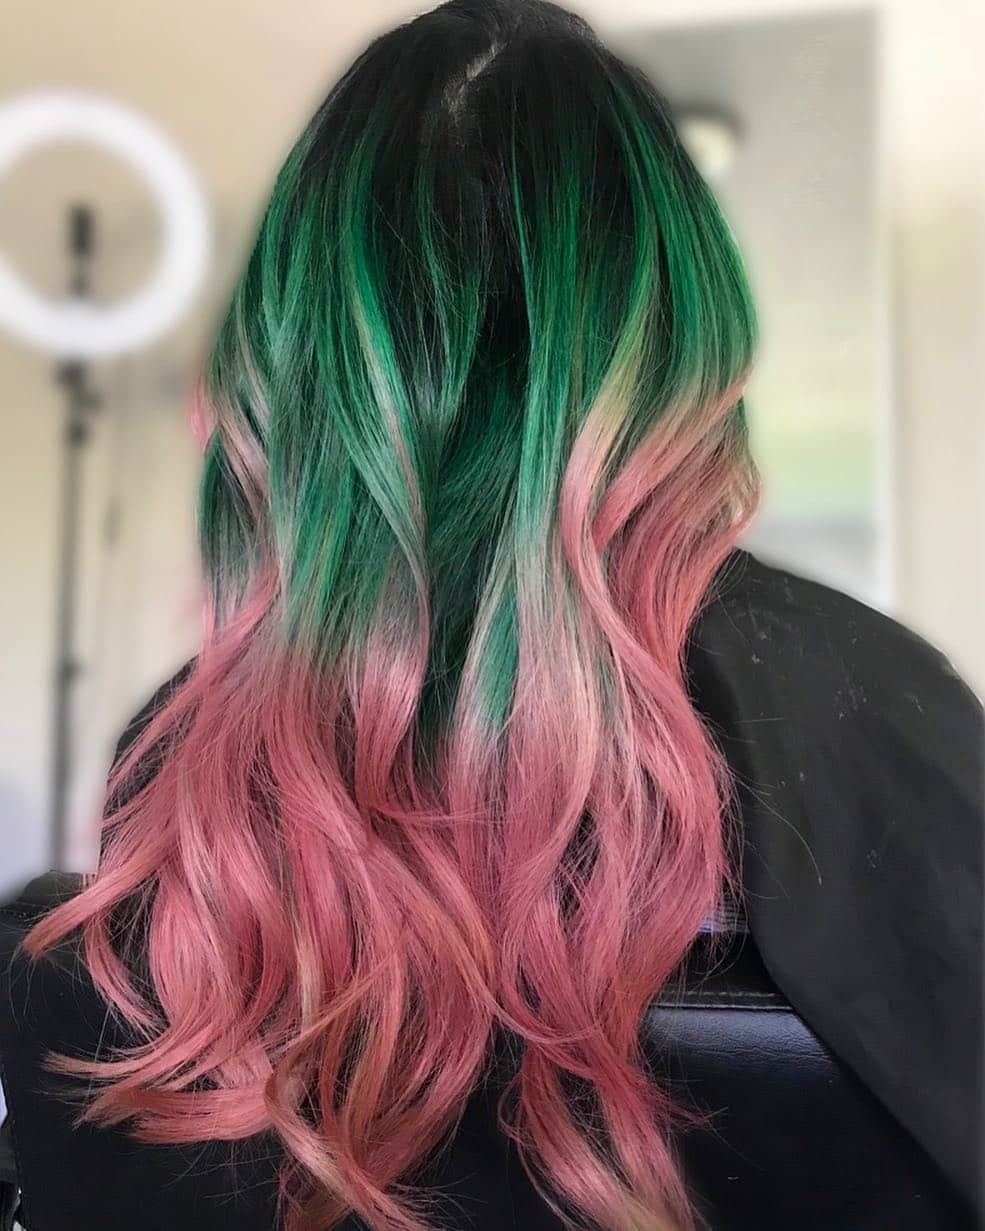 Hair color with a balayage technique blending shades of pink and green